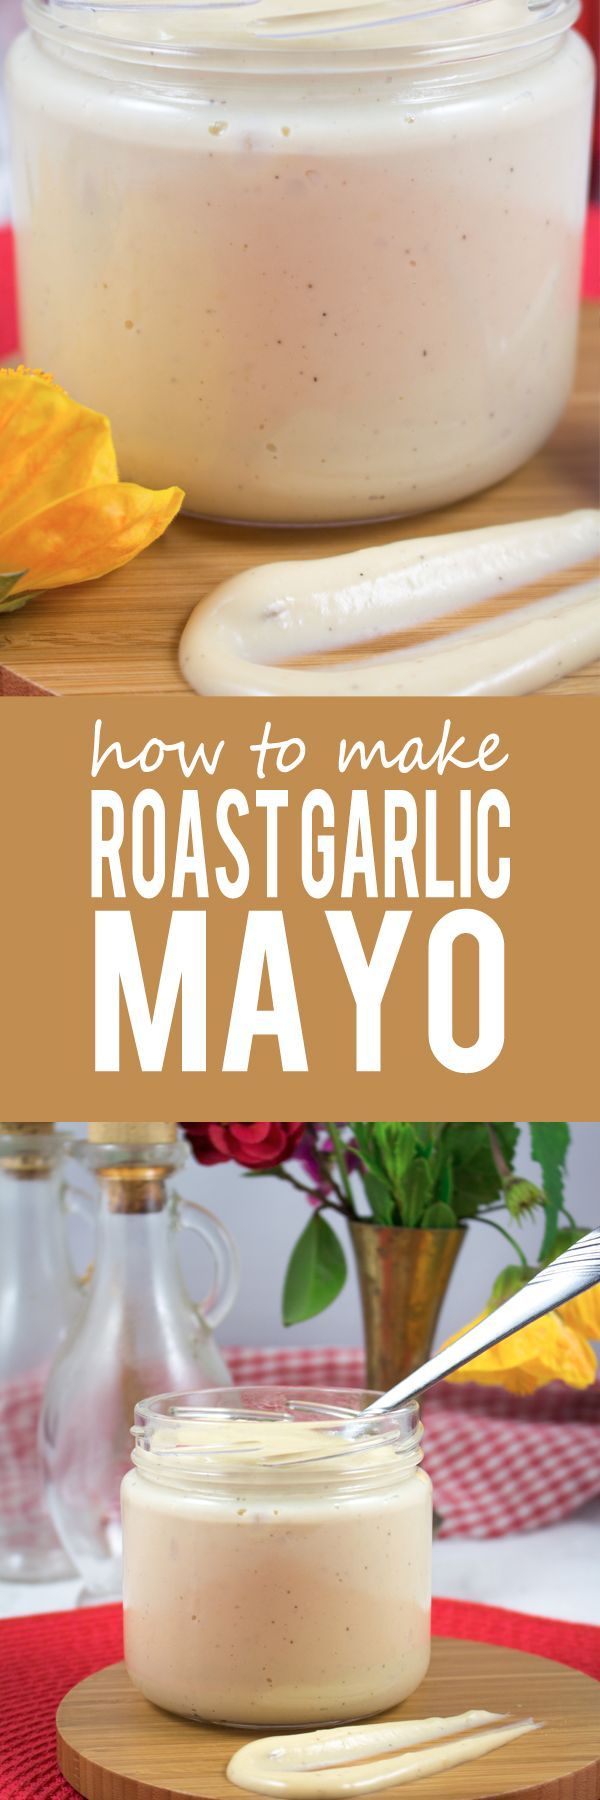 How To Make Roast Garlic Mayo – The BEST garlic mayo that tastes 100x better than store bought! Super